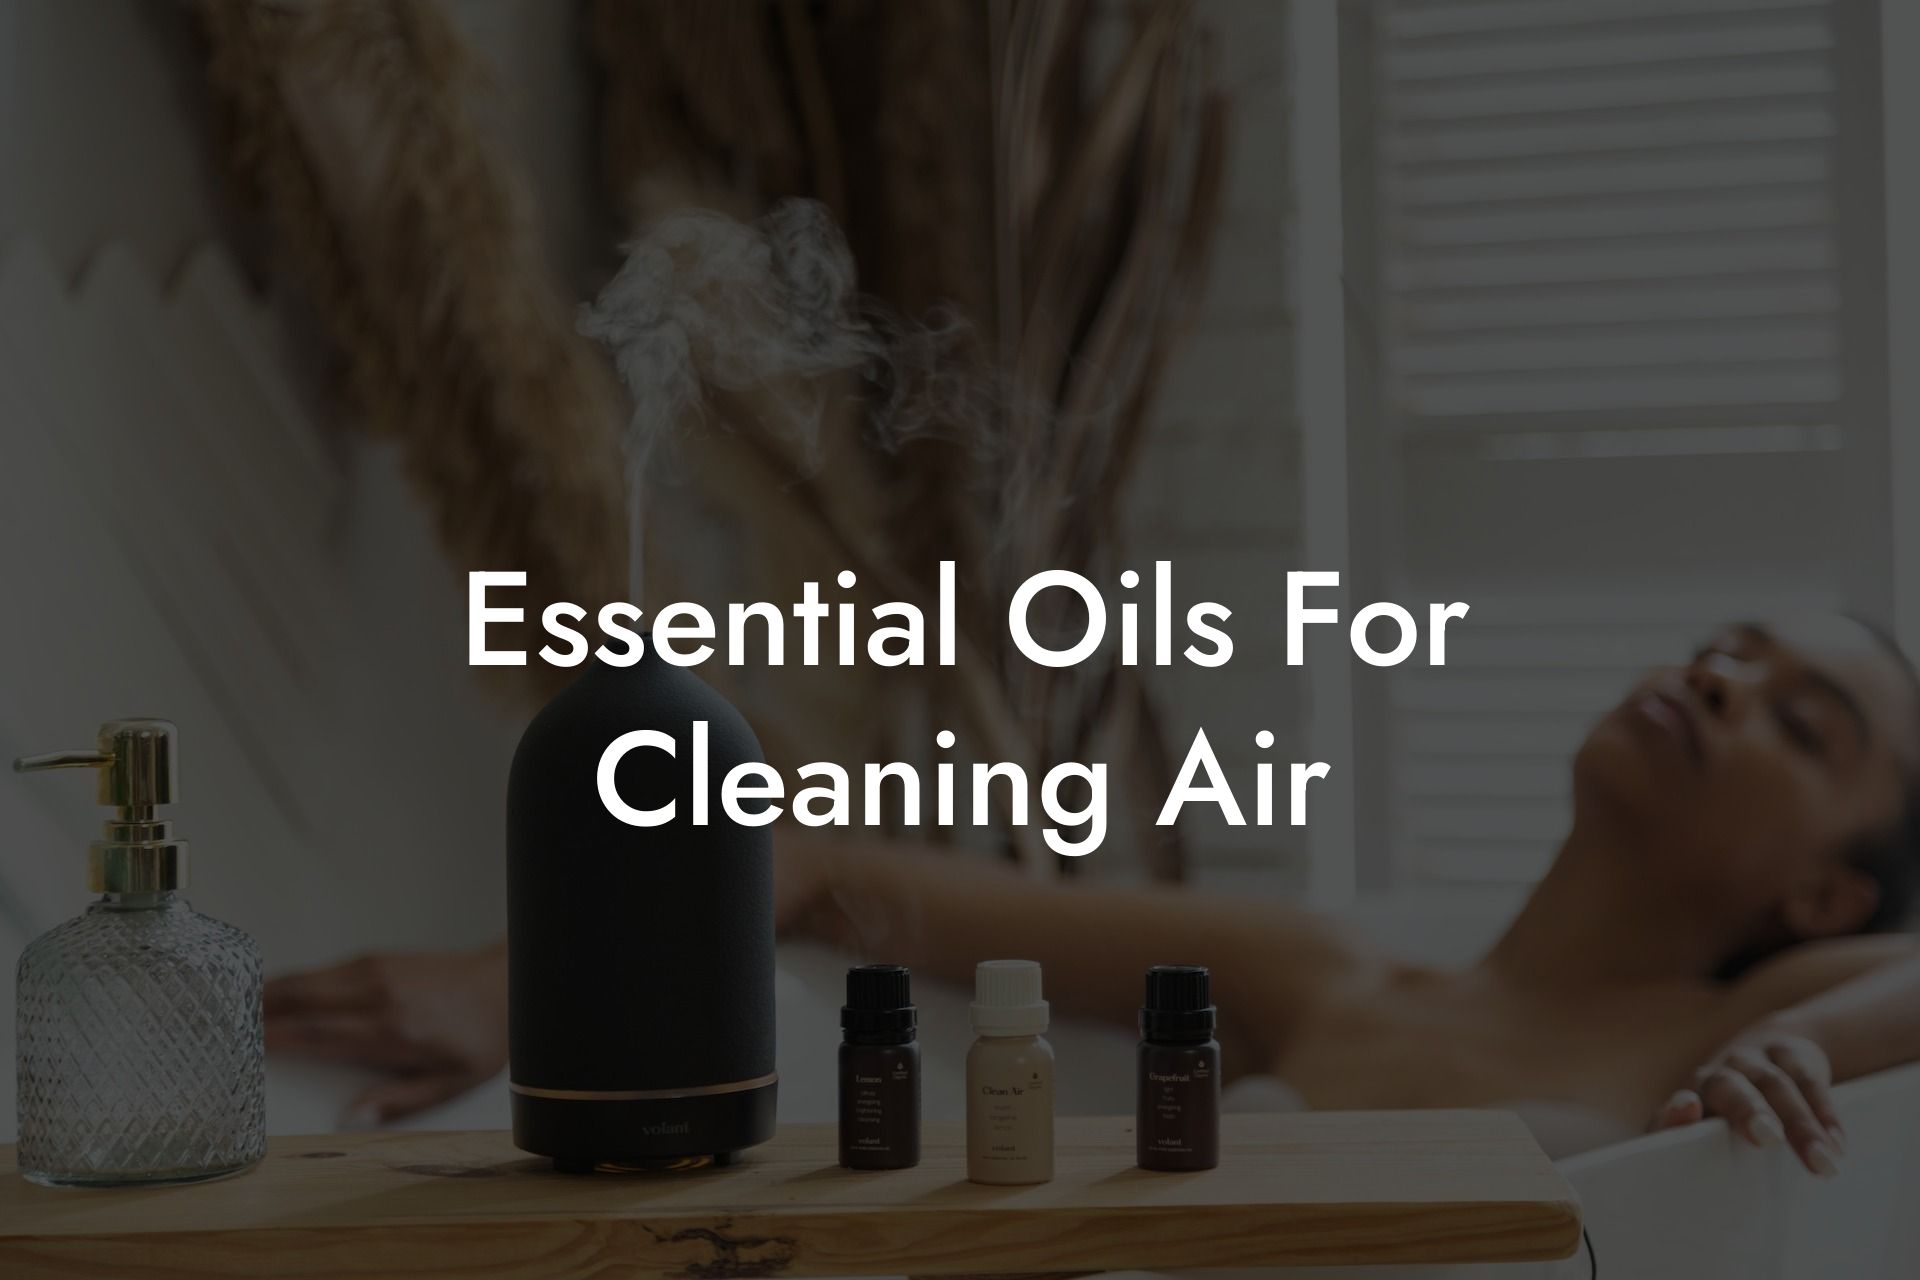 Essential Oils For Cleaning Air